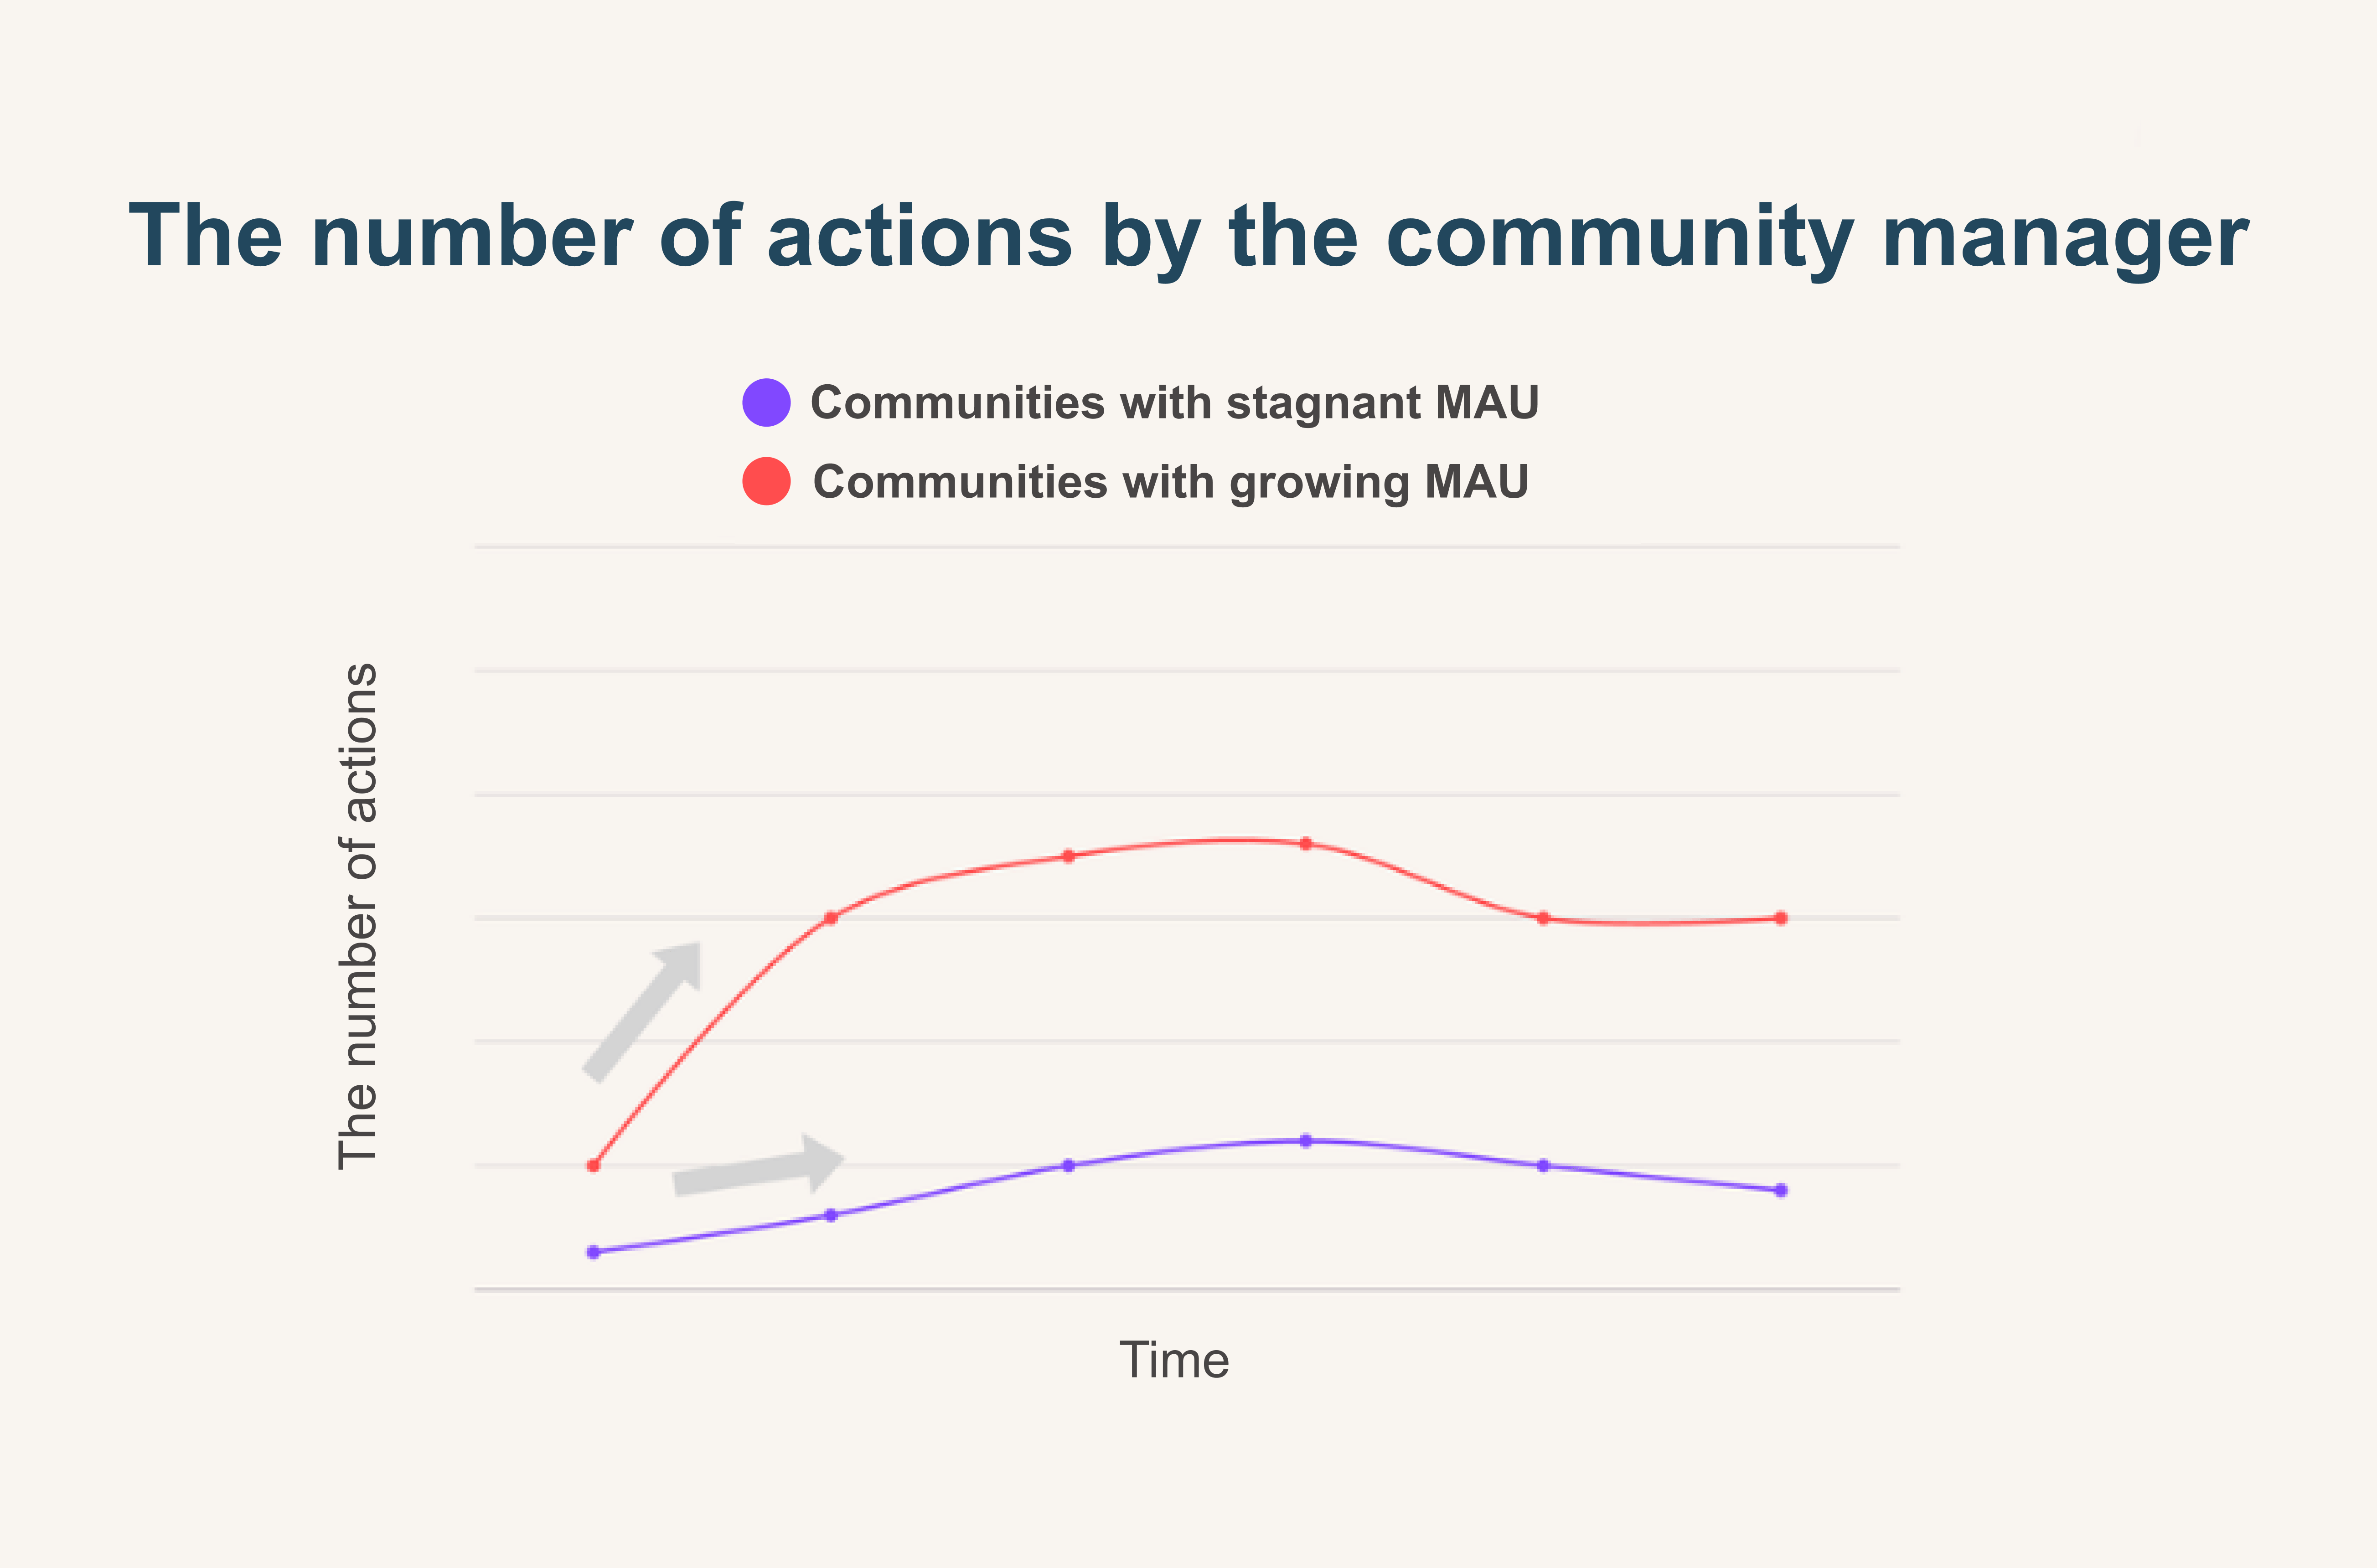 Communities experiencing growth in Monthly Active Users (MAU) demonstrate a significant number of initial actions by community managers, in contrast to those with a lower MAU.